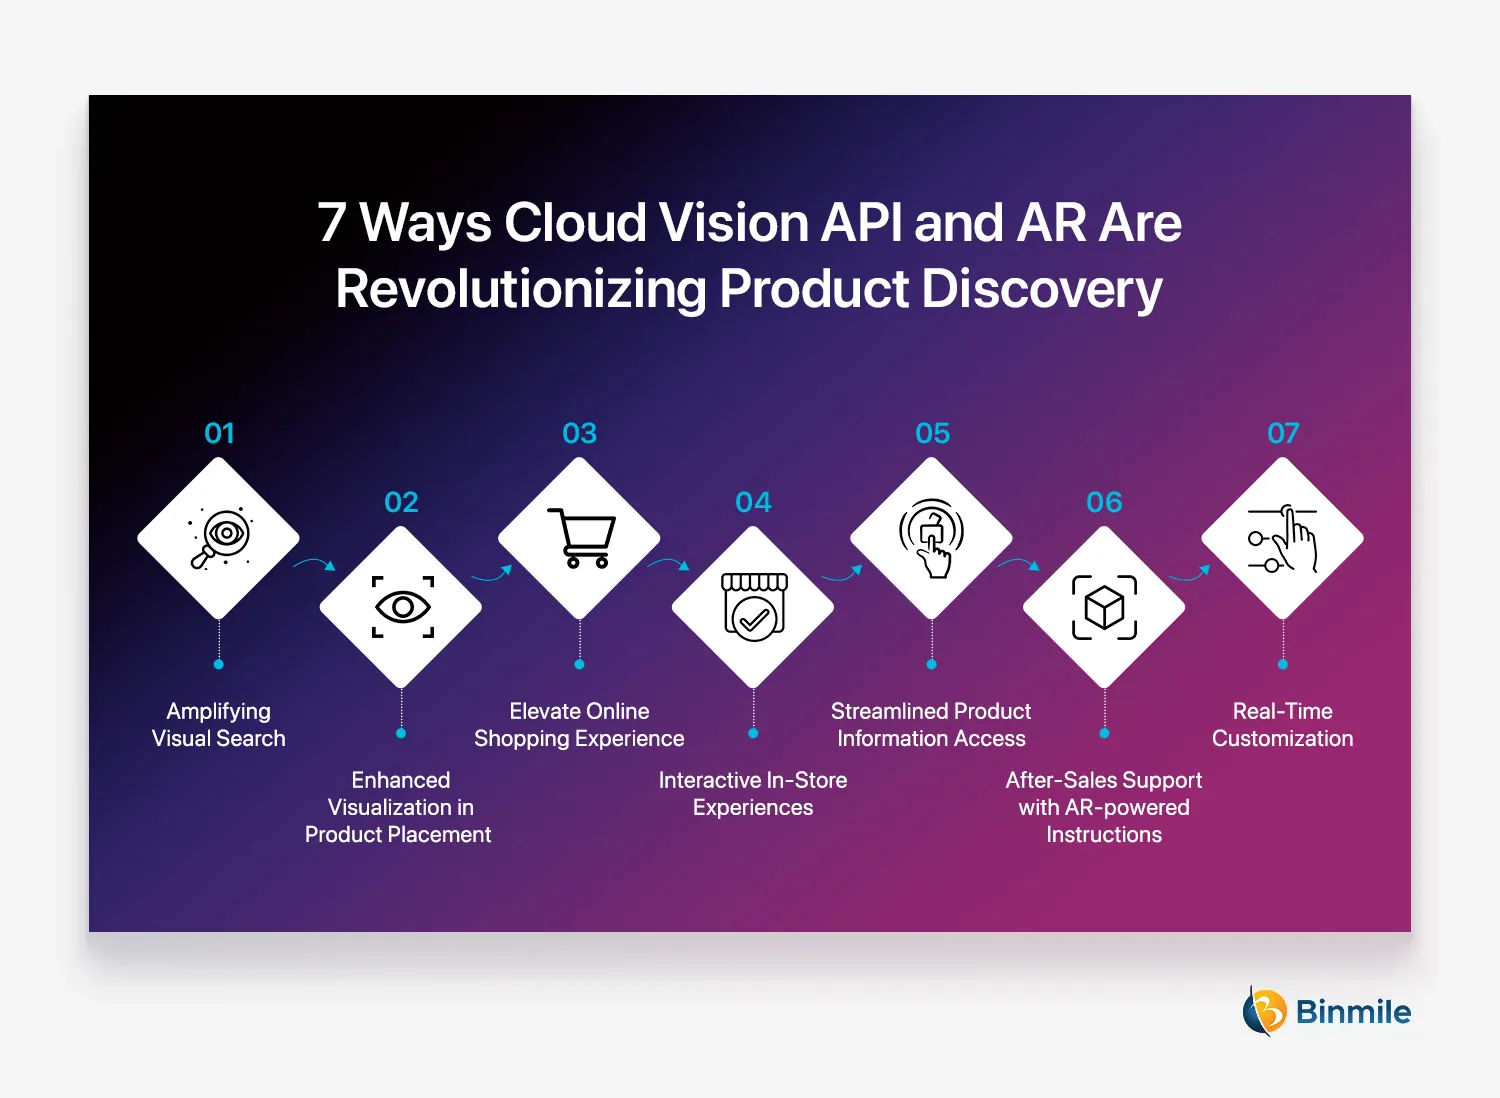 7 Ways Cloud Vision API and AR Are Revolutionizing Product Discovery | Binmile